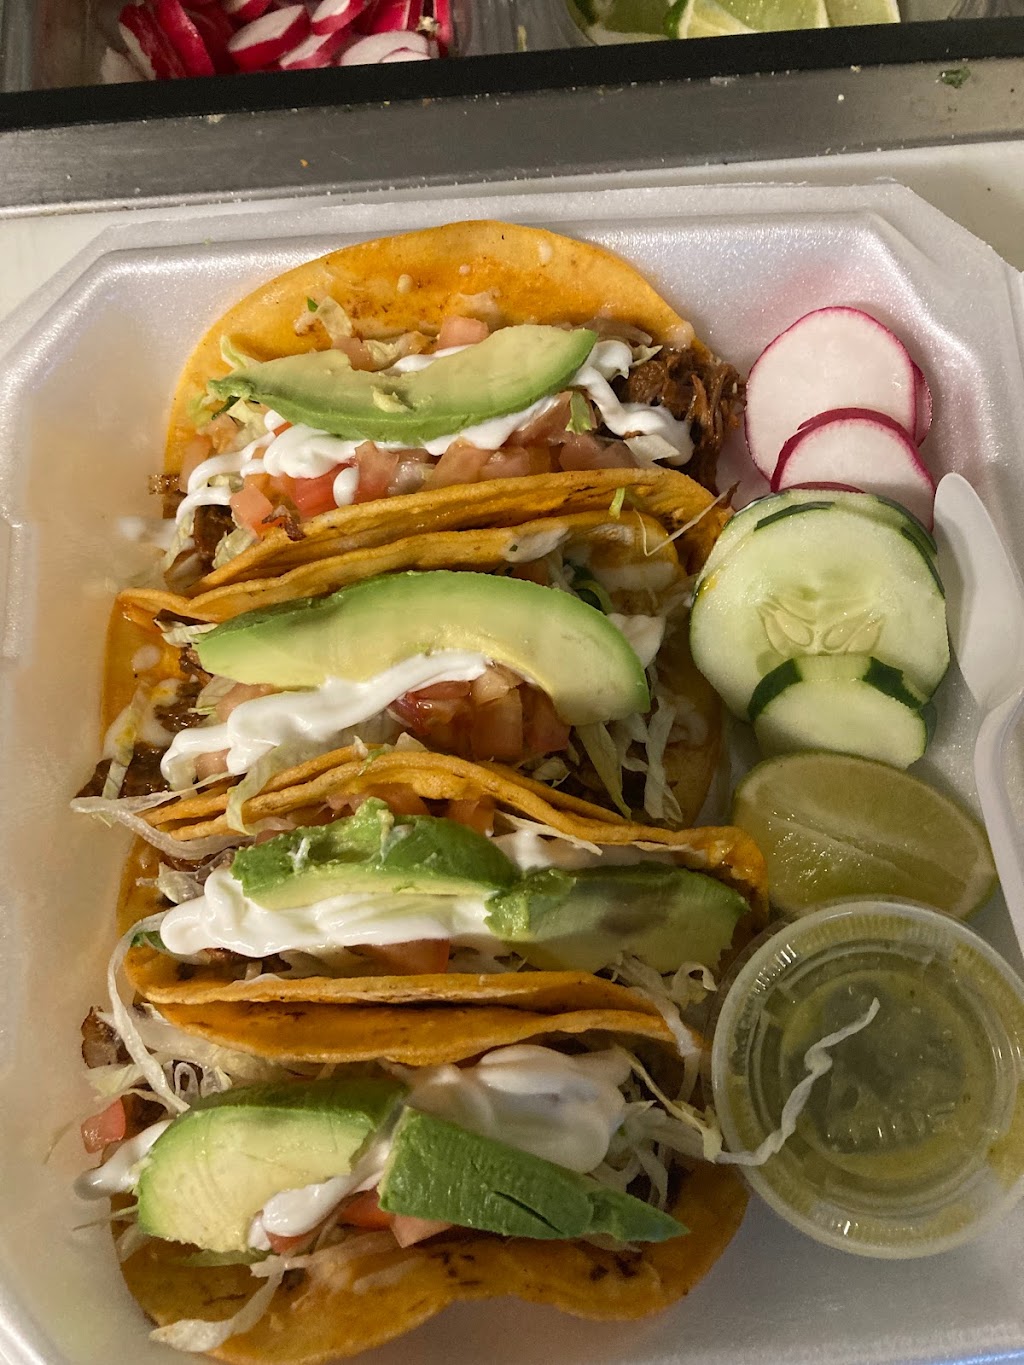 Food truck DON MARTIN Mexican cuisine lunch and breakfast | 2300 Waughtown St, Winston-Salem, NC 27107 | Phone: (336) 655-8907